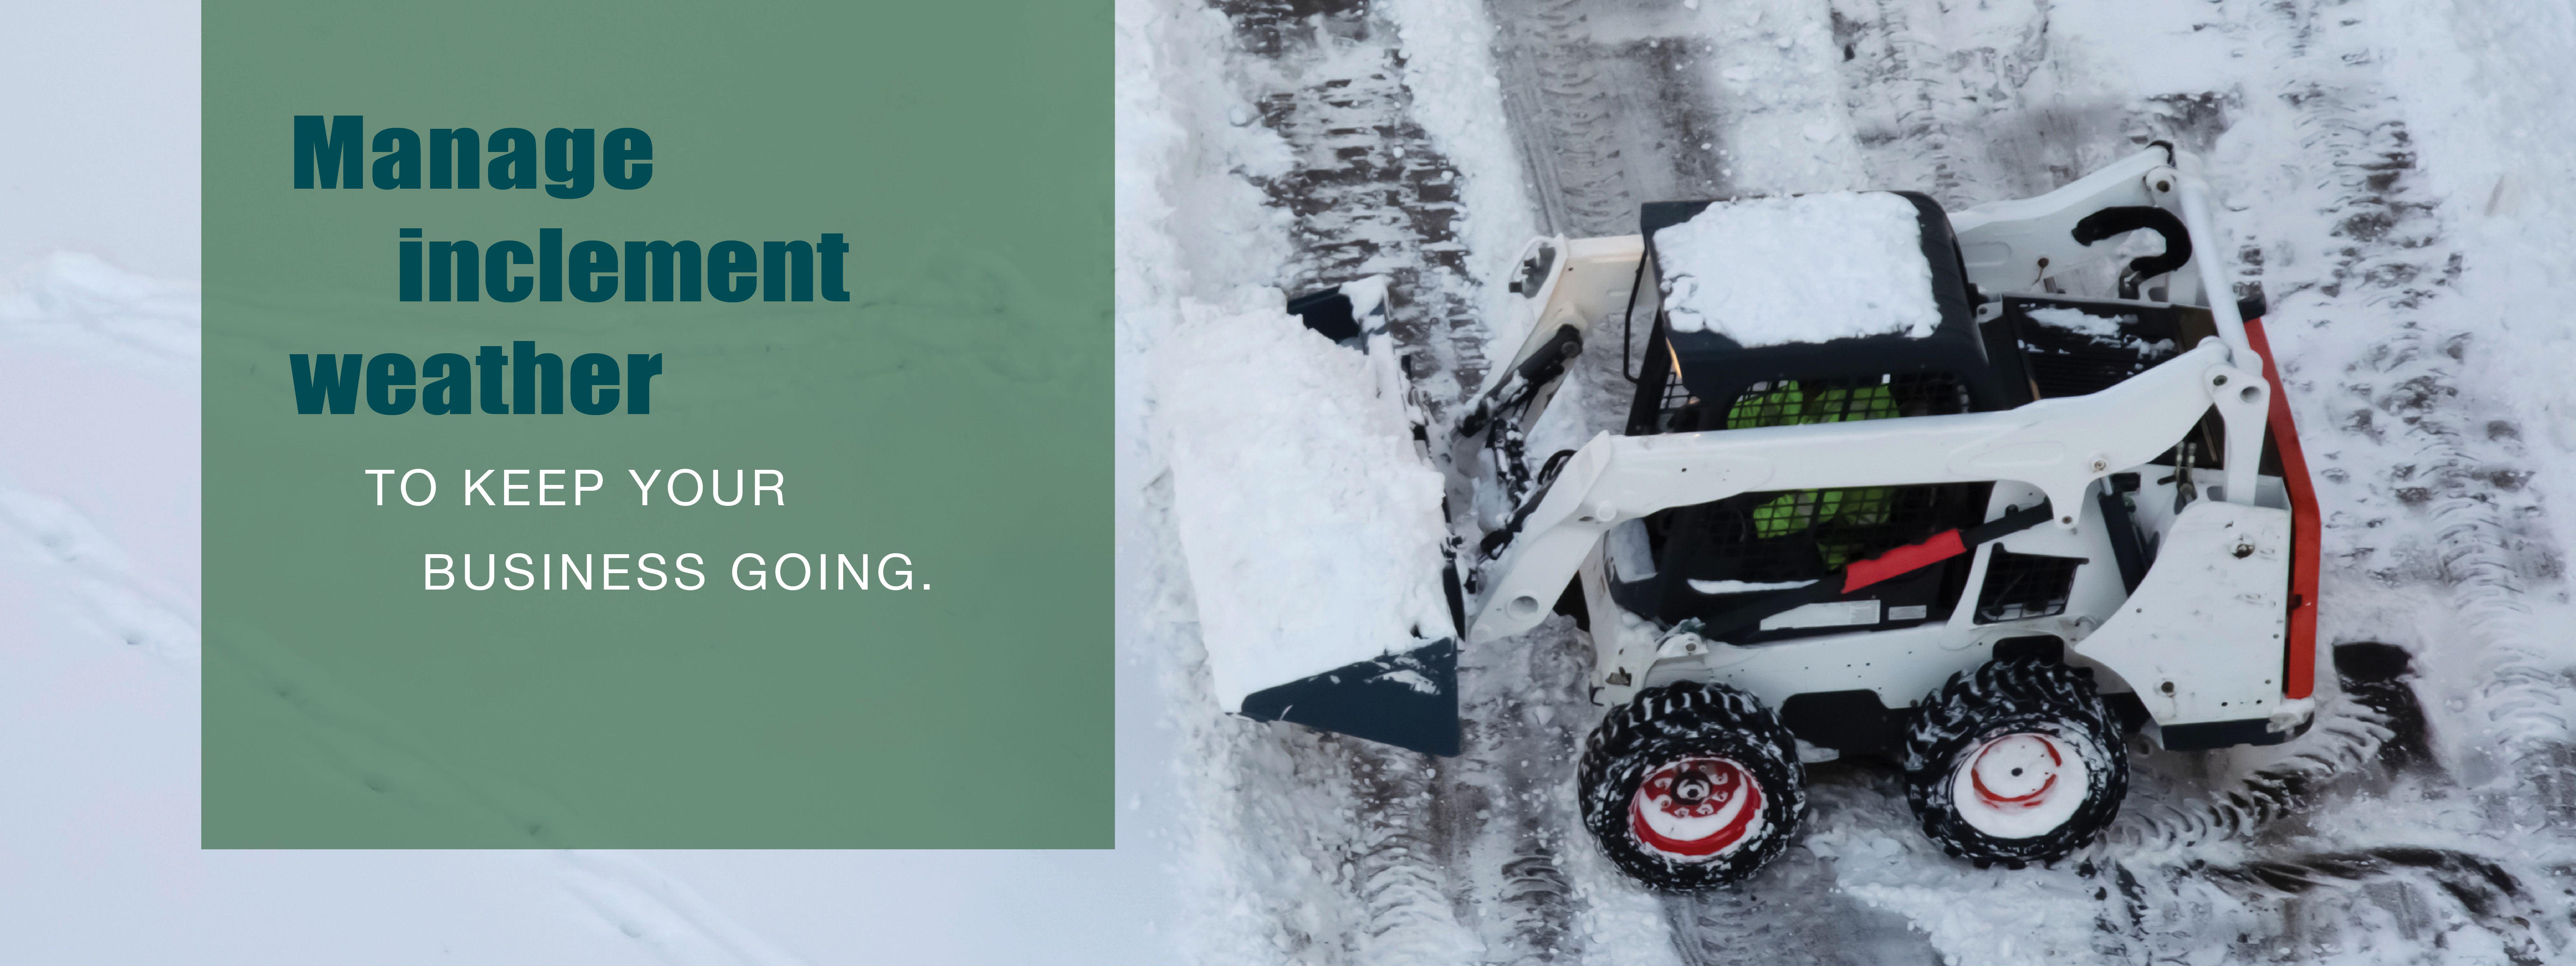 Removing snow and ice can be a daunting task. At US Lawn & Landscape we take care of our commercial customers, so they can continue business as usual.

Parking Lots
Sidewalks
Icemelt application